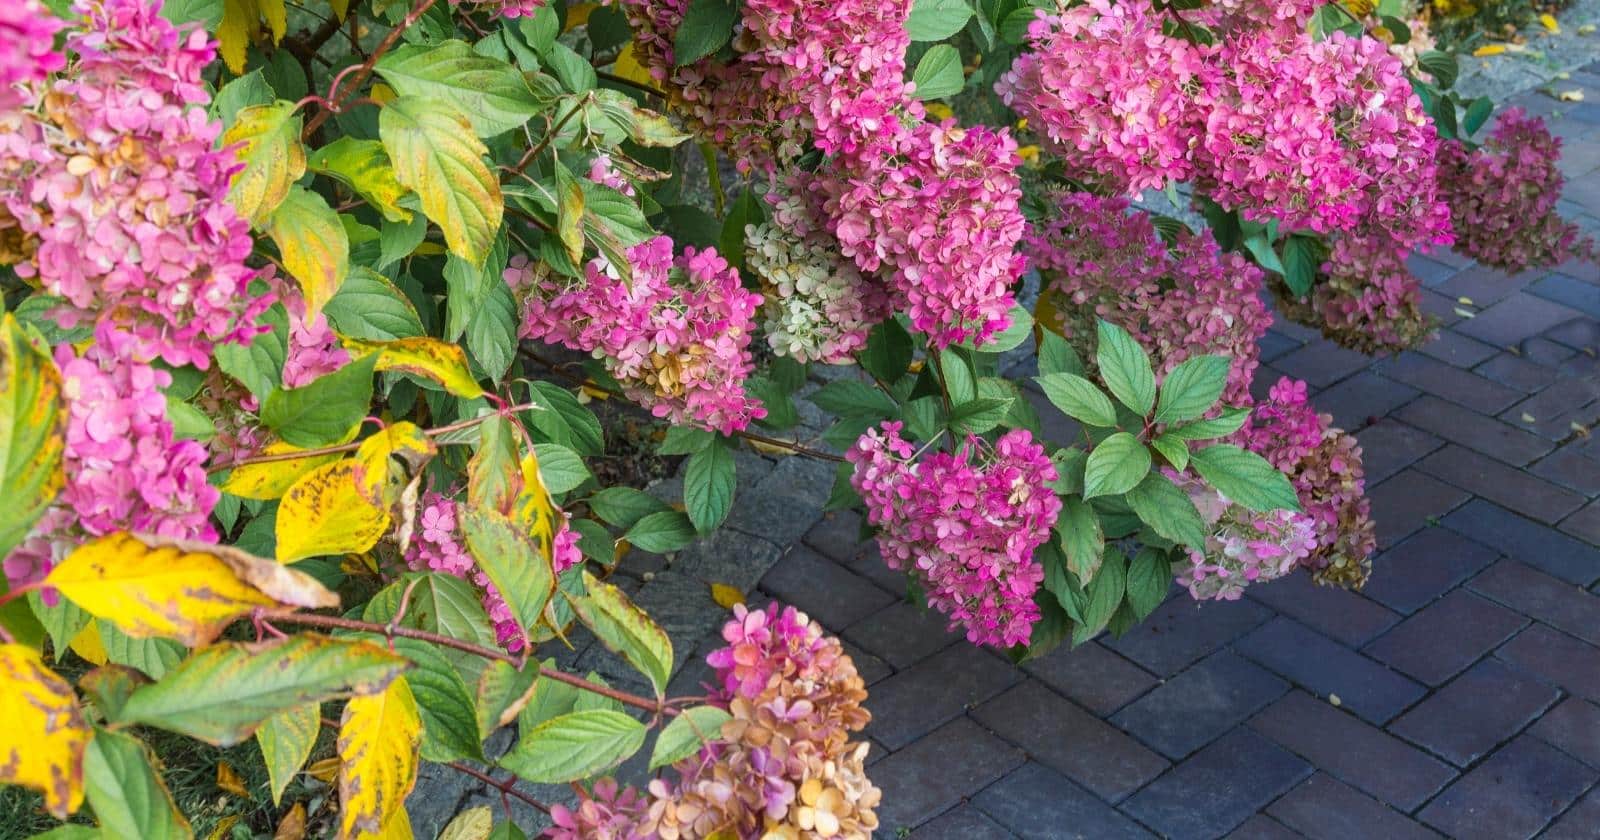 9 Common Reasons Your Hydrangea is Wilting & Drooping